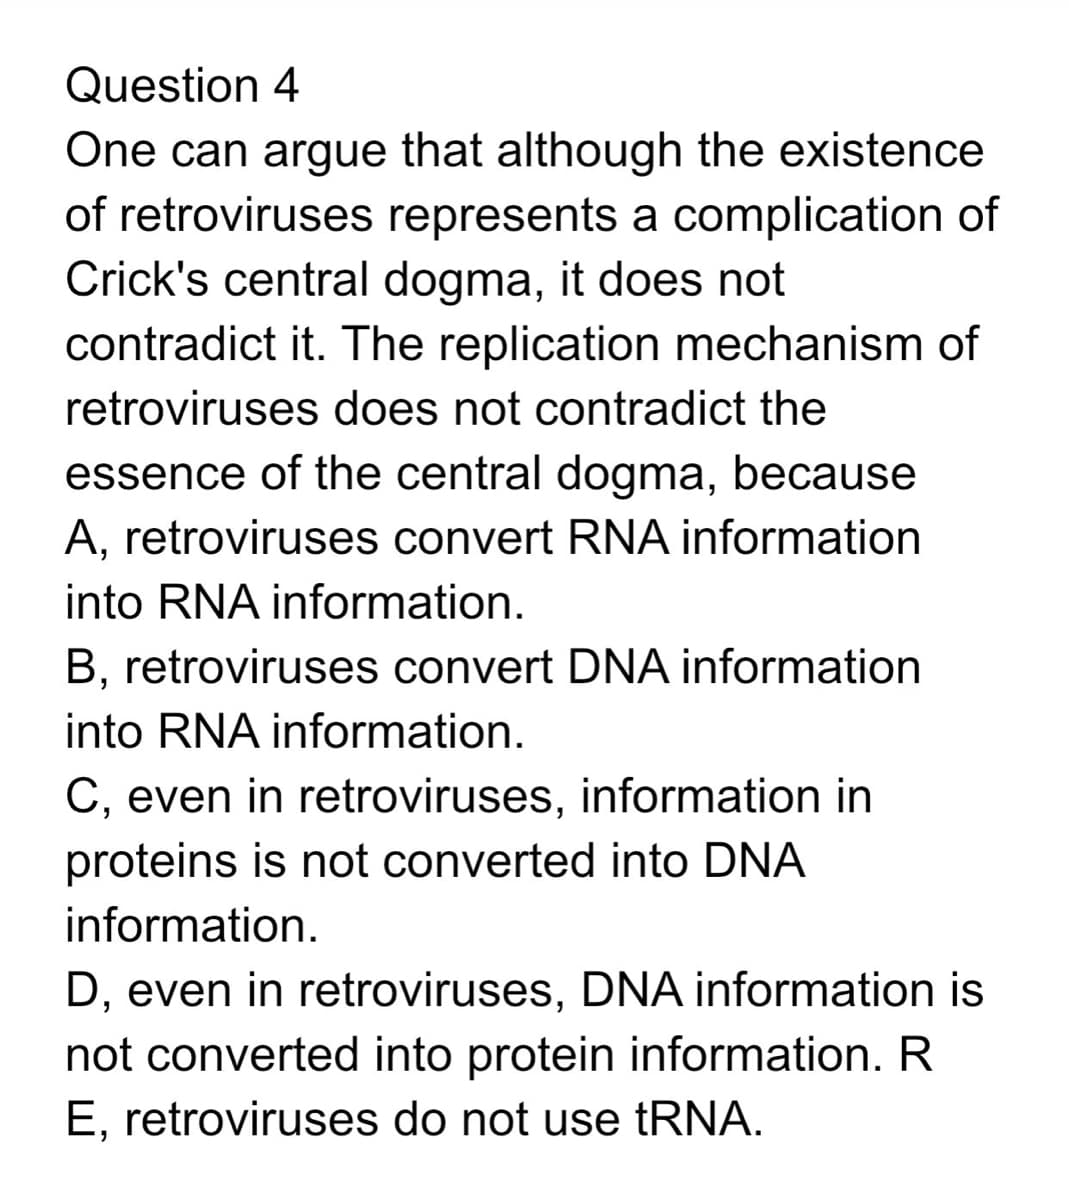 Question 4
One can argue that although the existence
of retroviruses represents a complication of
Crick's central dogma, it does not
contradict it. The replication mechanism of
retroviruses does not contradict the
essence of the central dogma, because
A, retroviruses convert RNA information
into RNA information.
B, retroviruses convert DNA information
into RNA information.
C, even in retroviruses, information in
proteins is not converted into DNA
information.
D, even in retroviruses, DNA information is
not converted into protein information. R
E, retroviruses do not use tRNA.